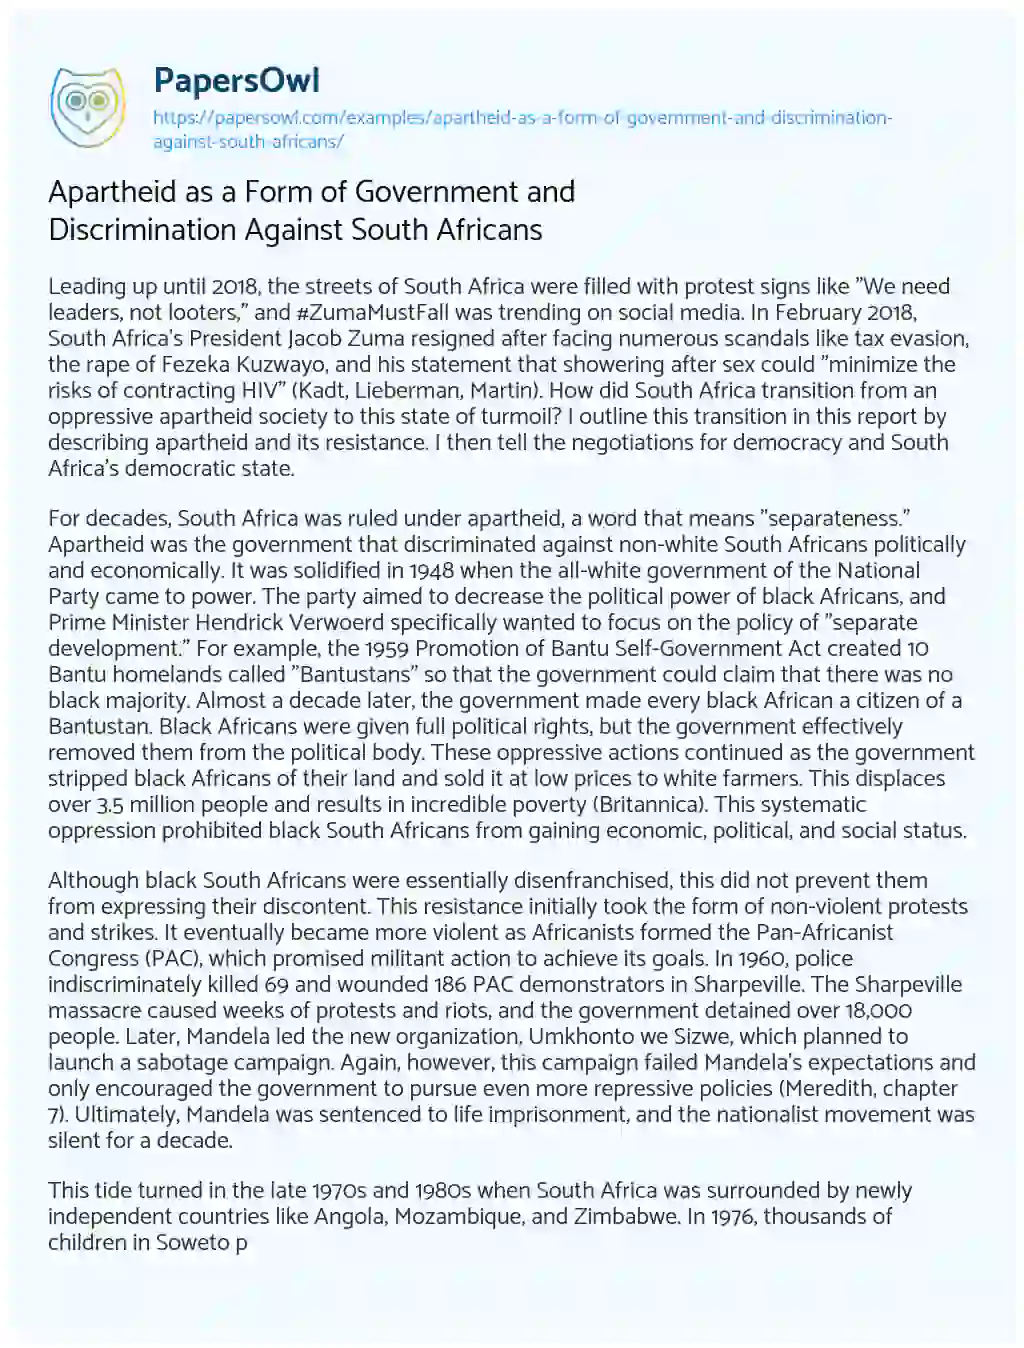 Essay on Apartheid as a Form of Government and Discrimination against South Africans